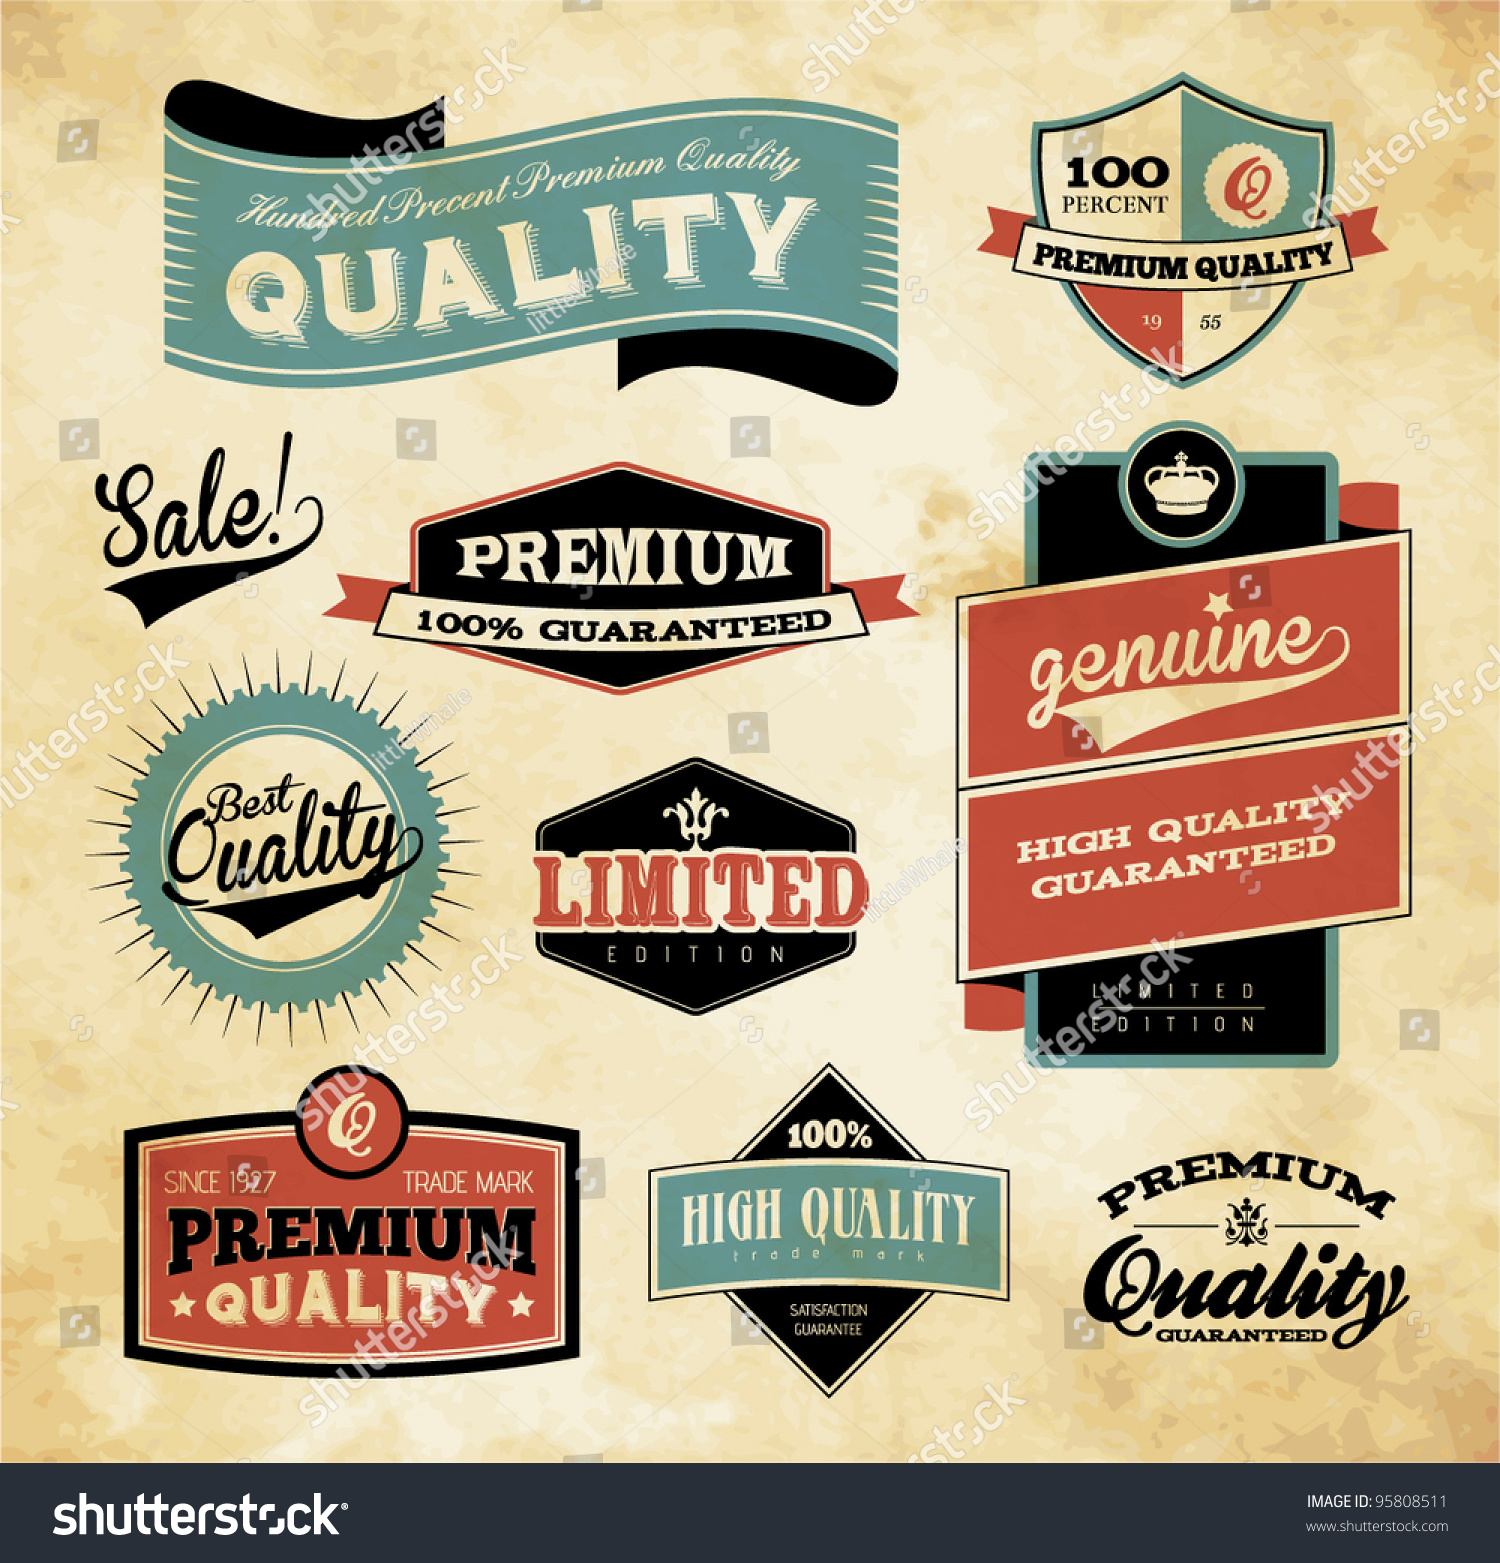 Premium And High Quality Label / Icon Stock Vector Illustration ...